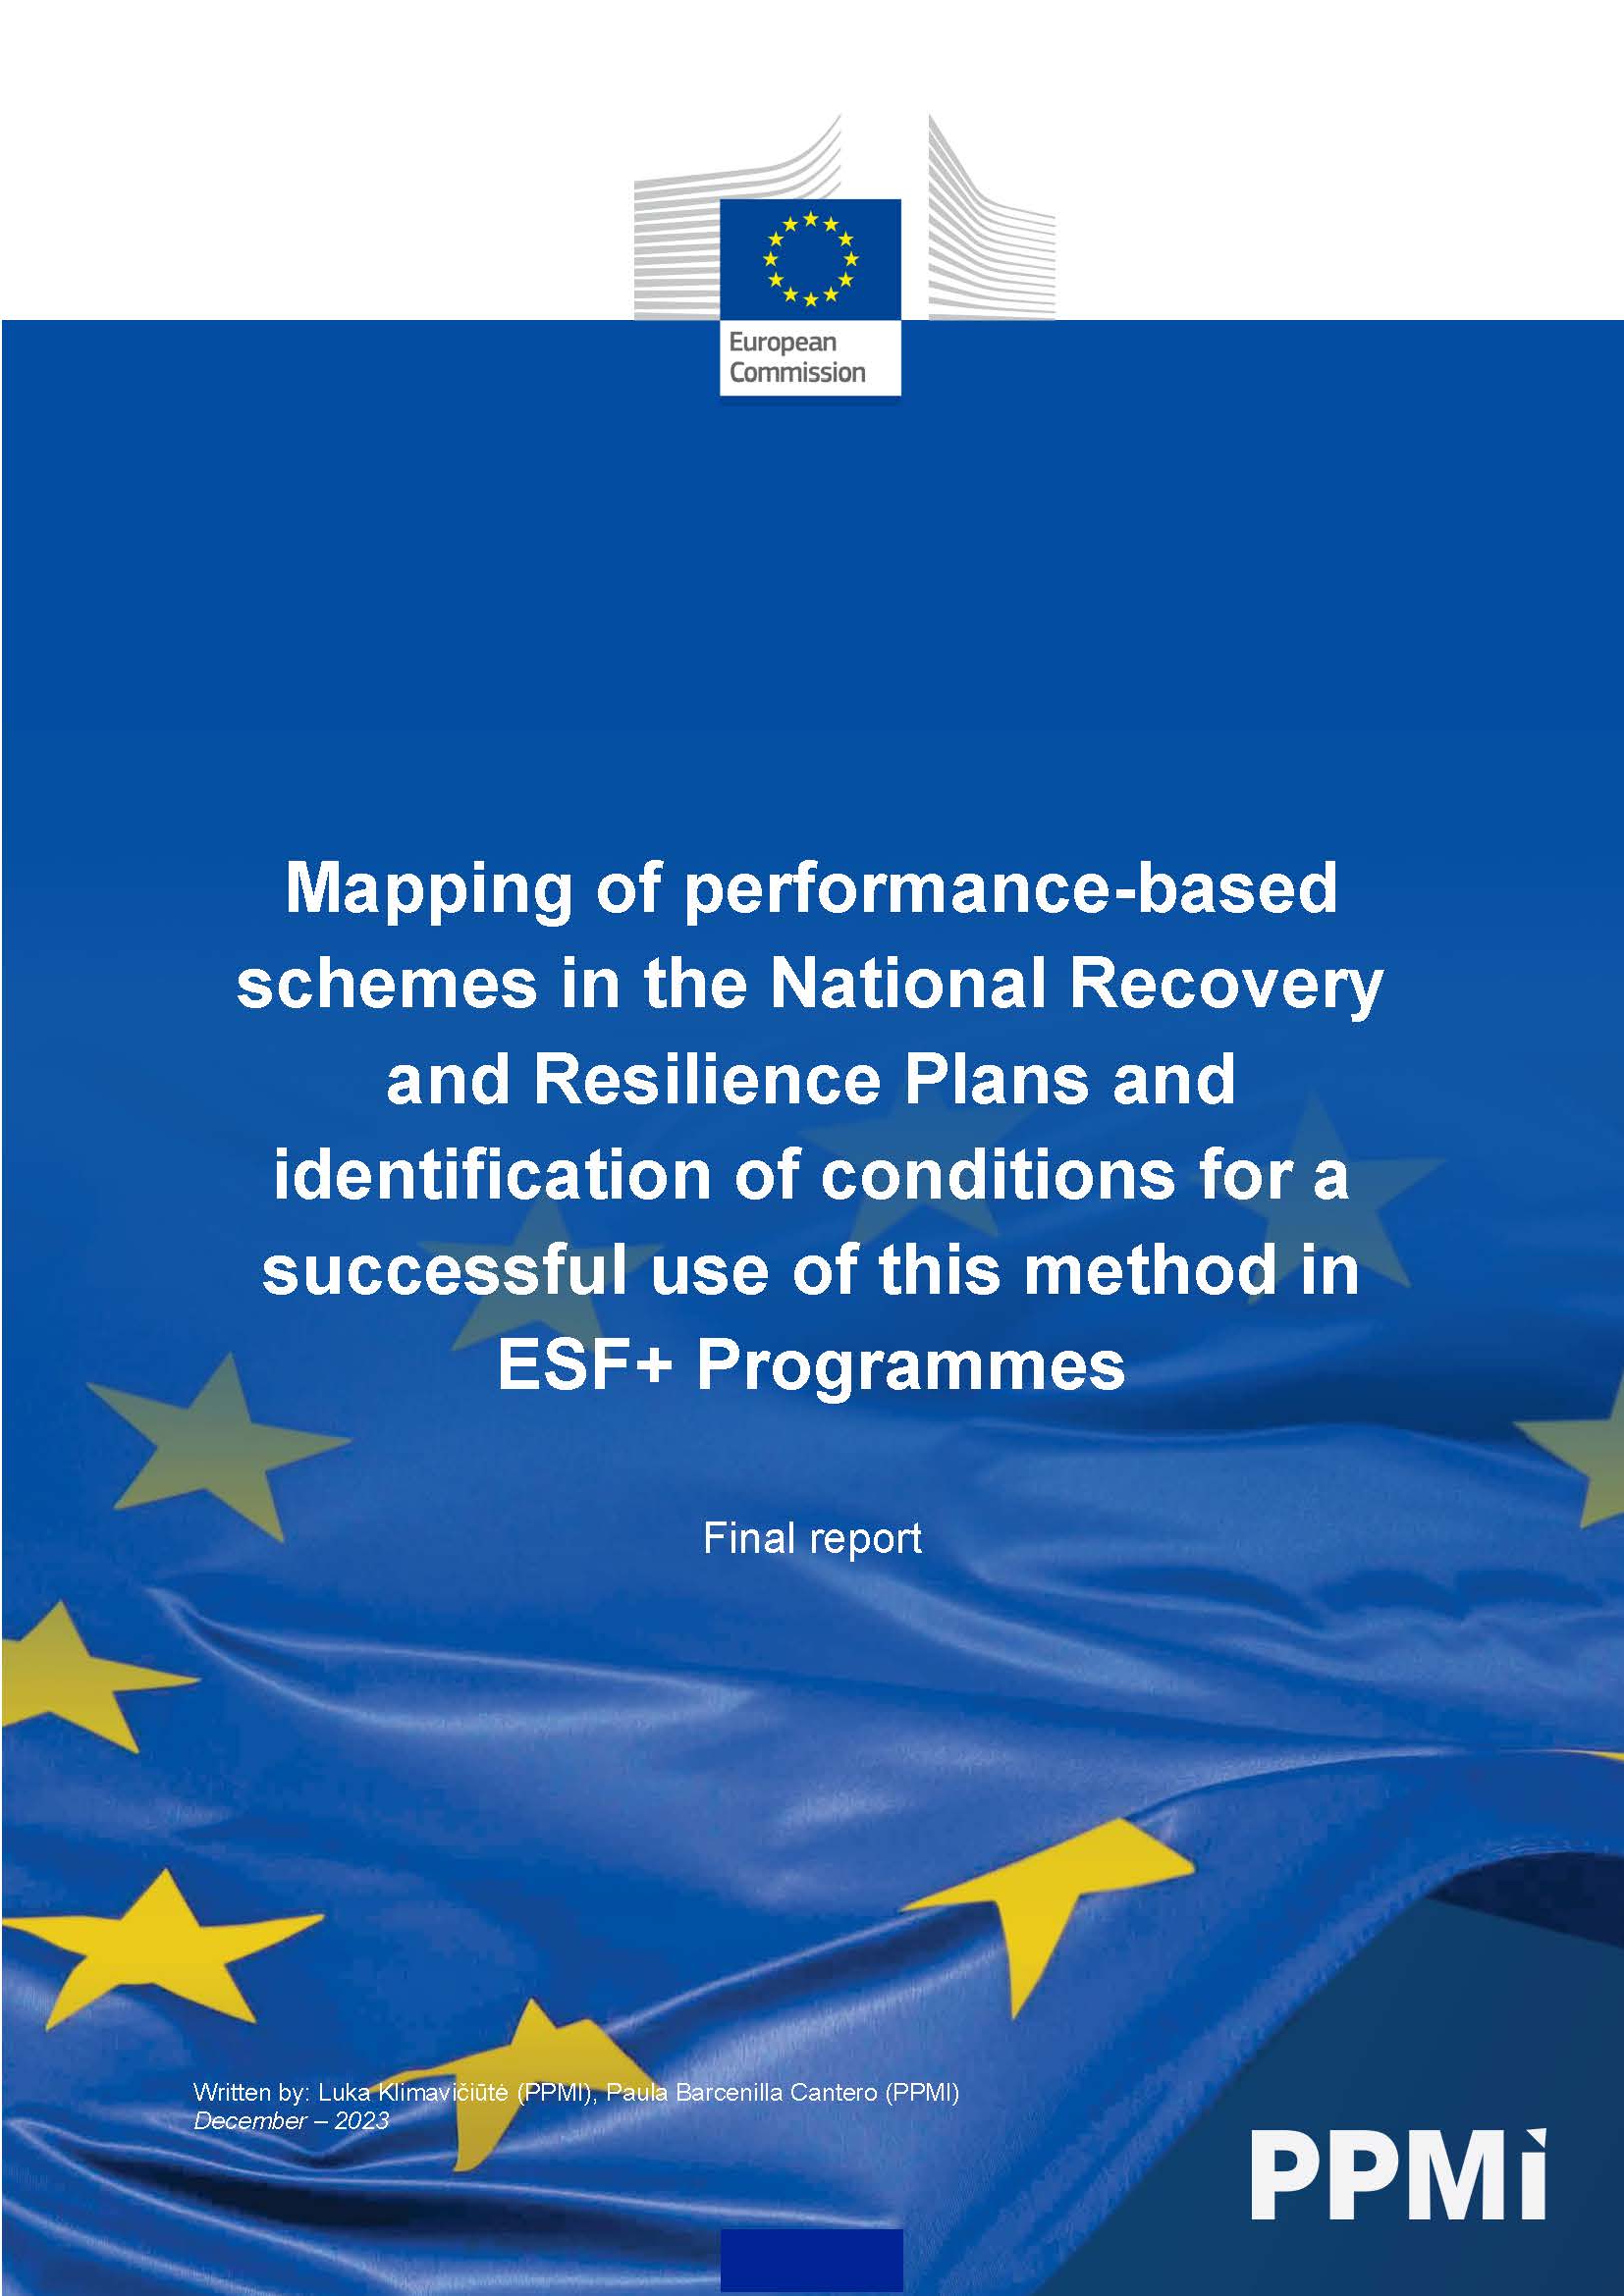 Mapping of performance-based schemes in the National Recovery and Resilience Plans and identification of conditions for a successful use of this method in ESF+ Programmes